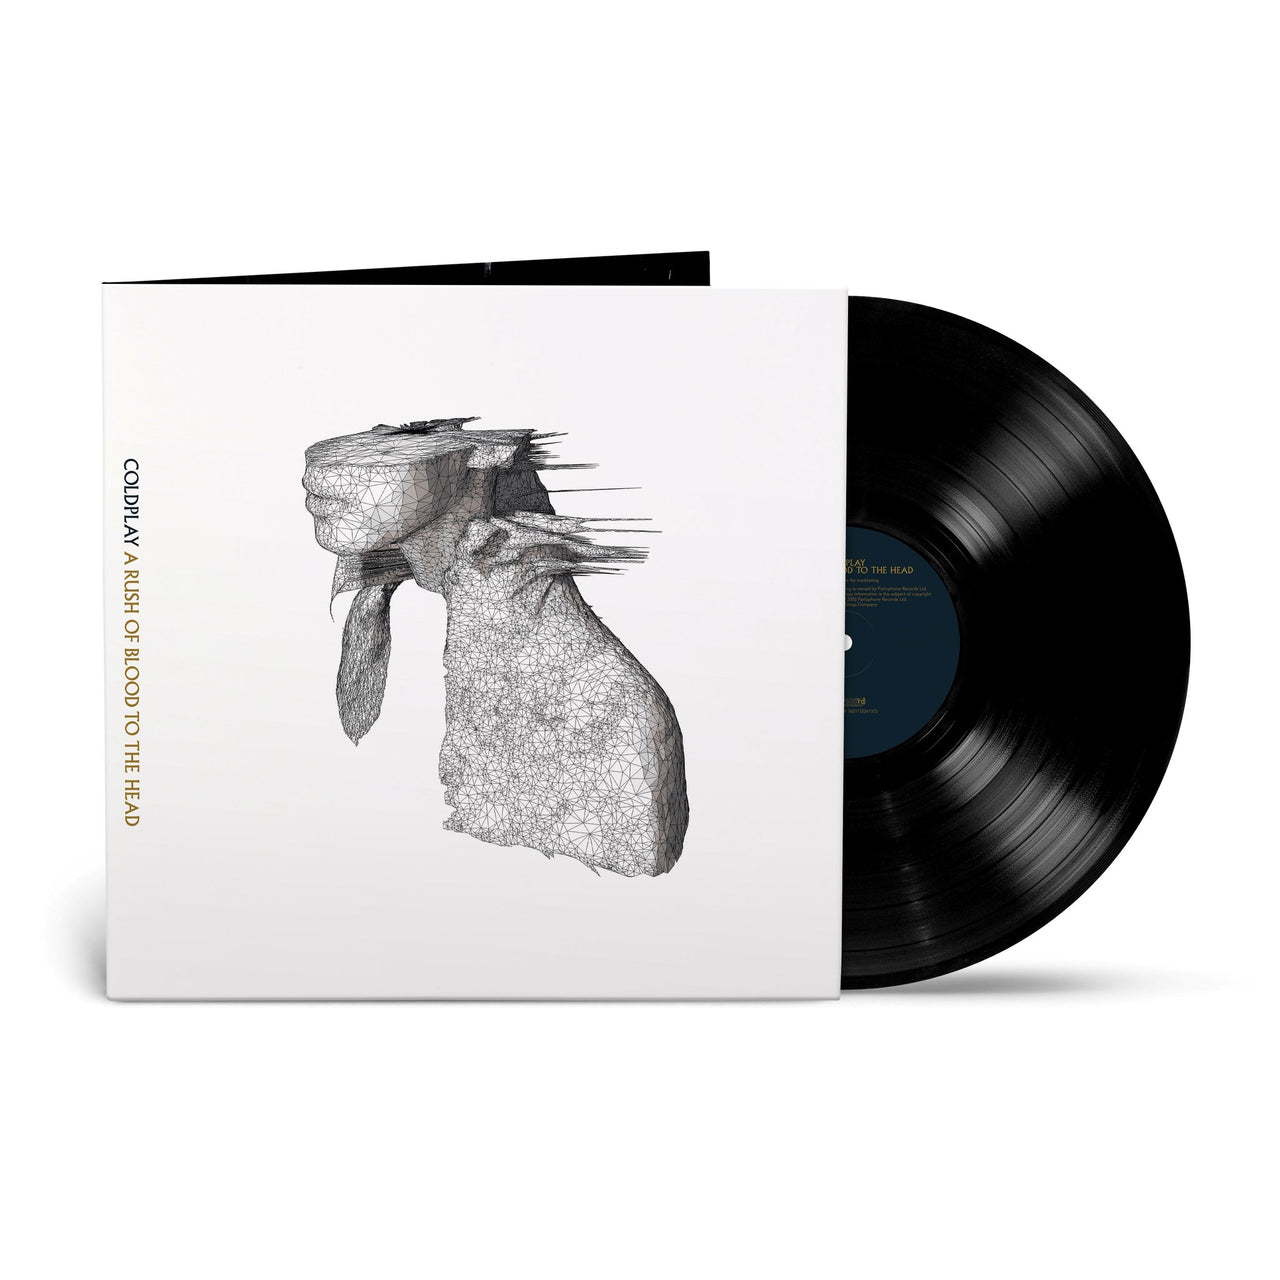 Coldplay: A Rush Of Blood To The Head Vinyl (Eco Vinyl)